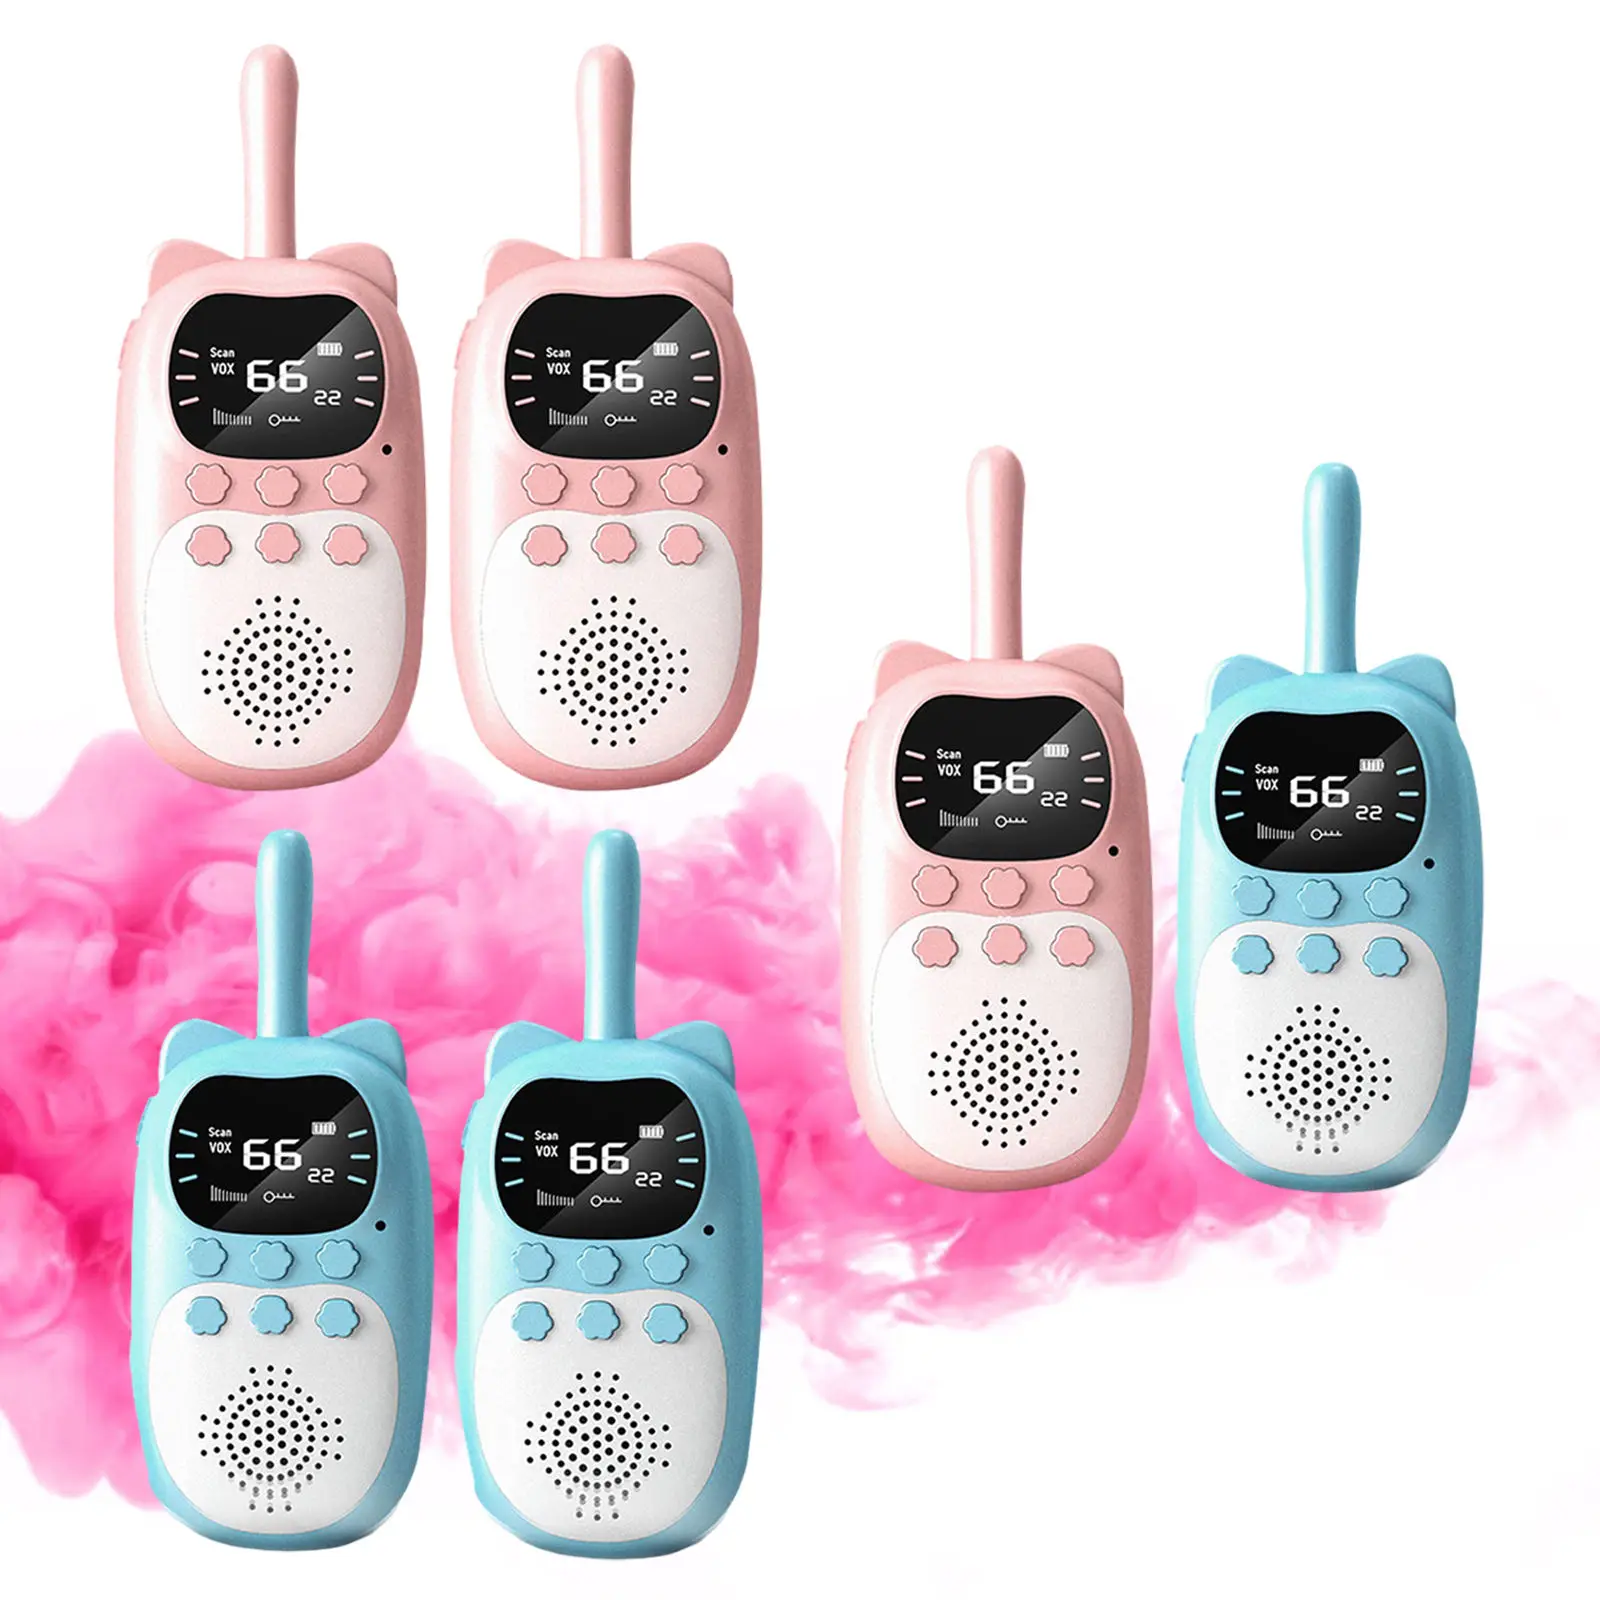 ABS Kids Walkie Talkies with FM Radio LCD Toys for Children Fishing Camping